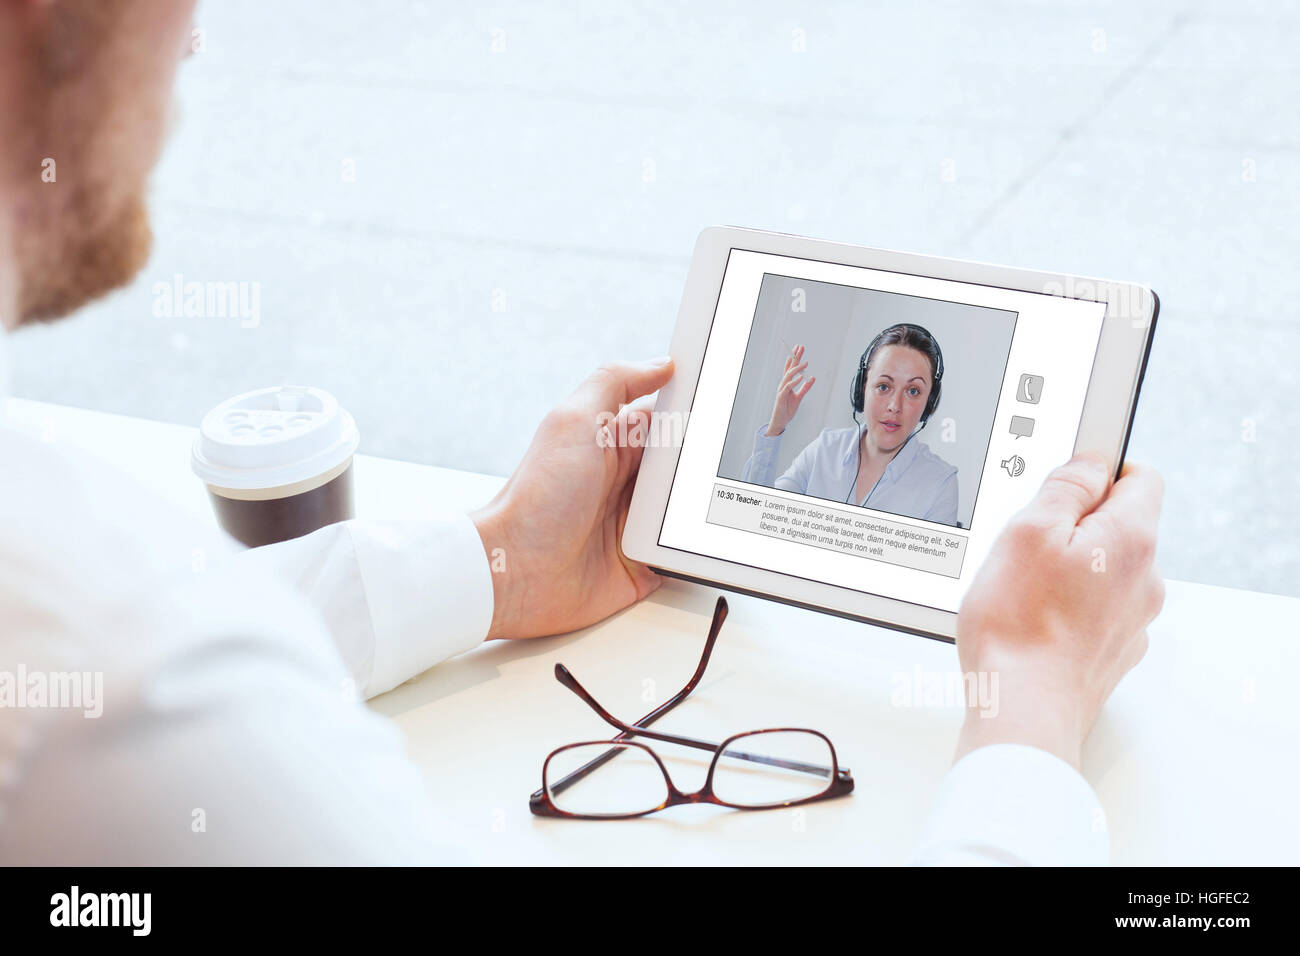 e-learning, video conference, coaching online, man looking at the screen of tablet Stock Photo